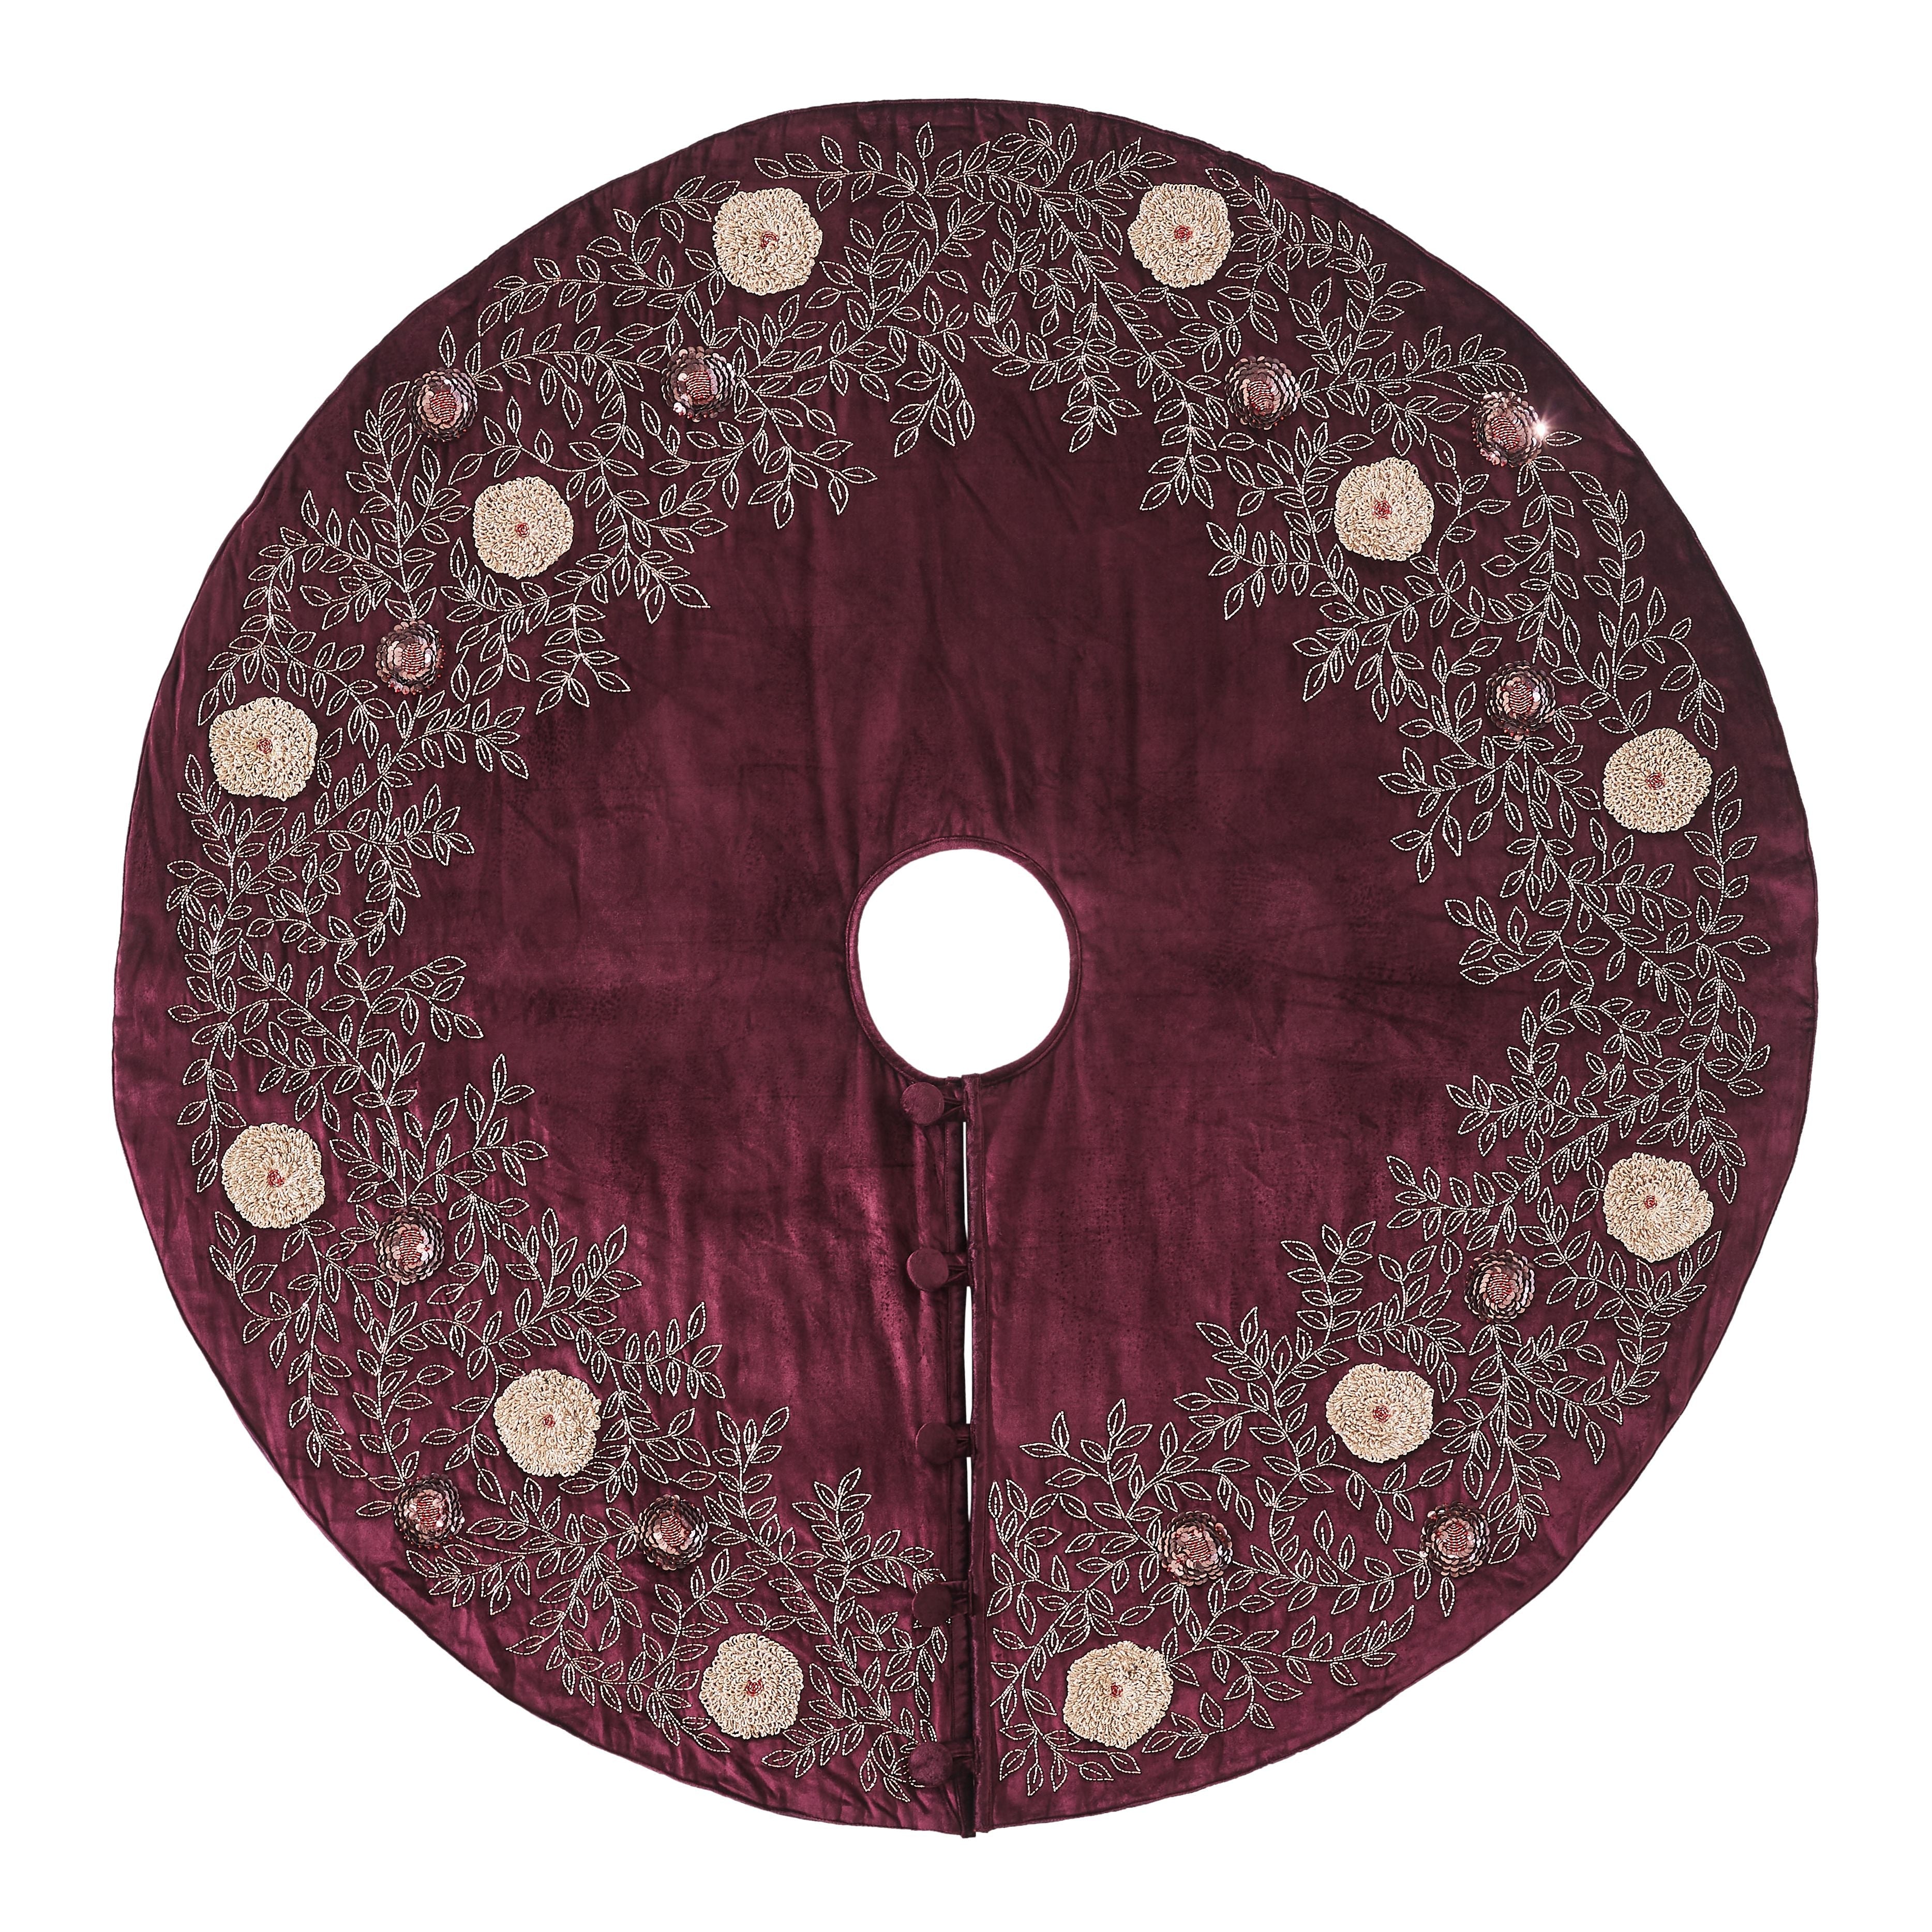 Embroidered and Sequined Holiday Christmas Tree Skirt, Burgundy, 54-inch  Round | eBay